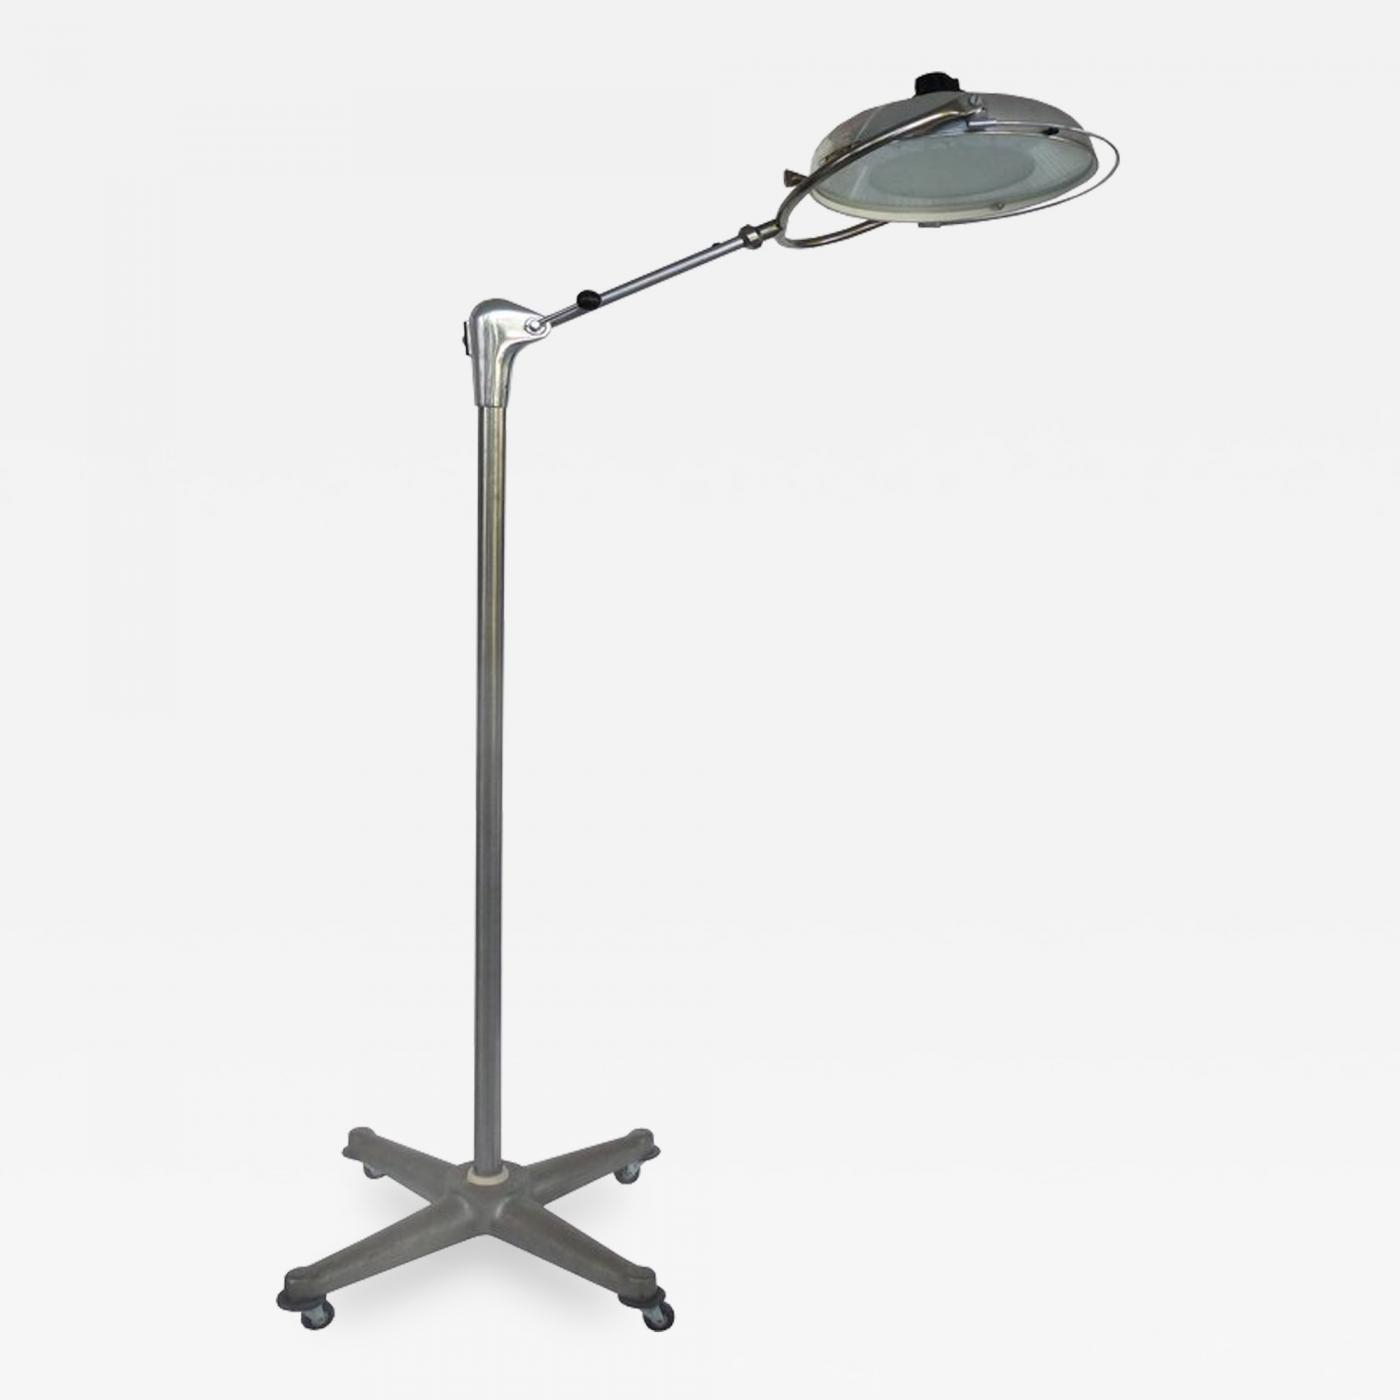 Scialytique Scialytique French Industrial Surgical Floor Lamp With Pivoting Adjustable Arm intended for proportions 1400 X 1400